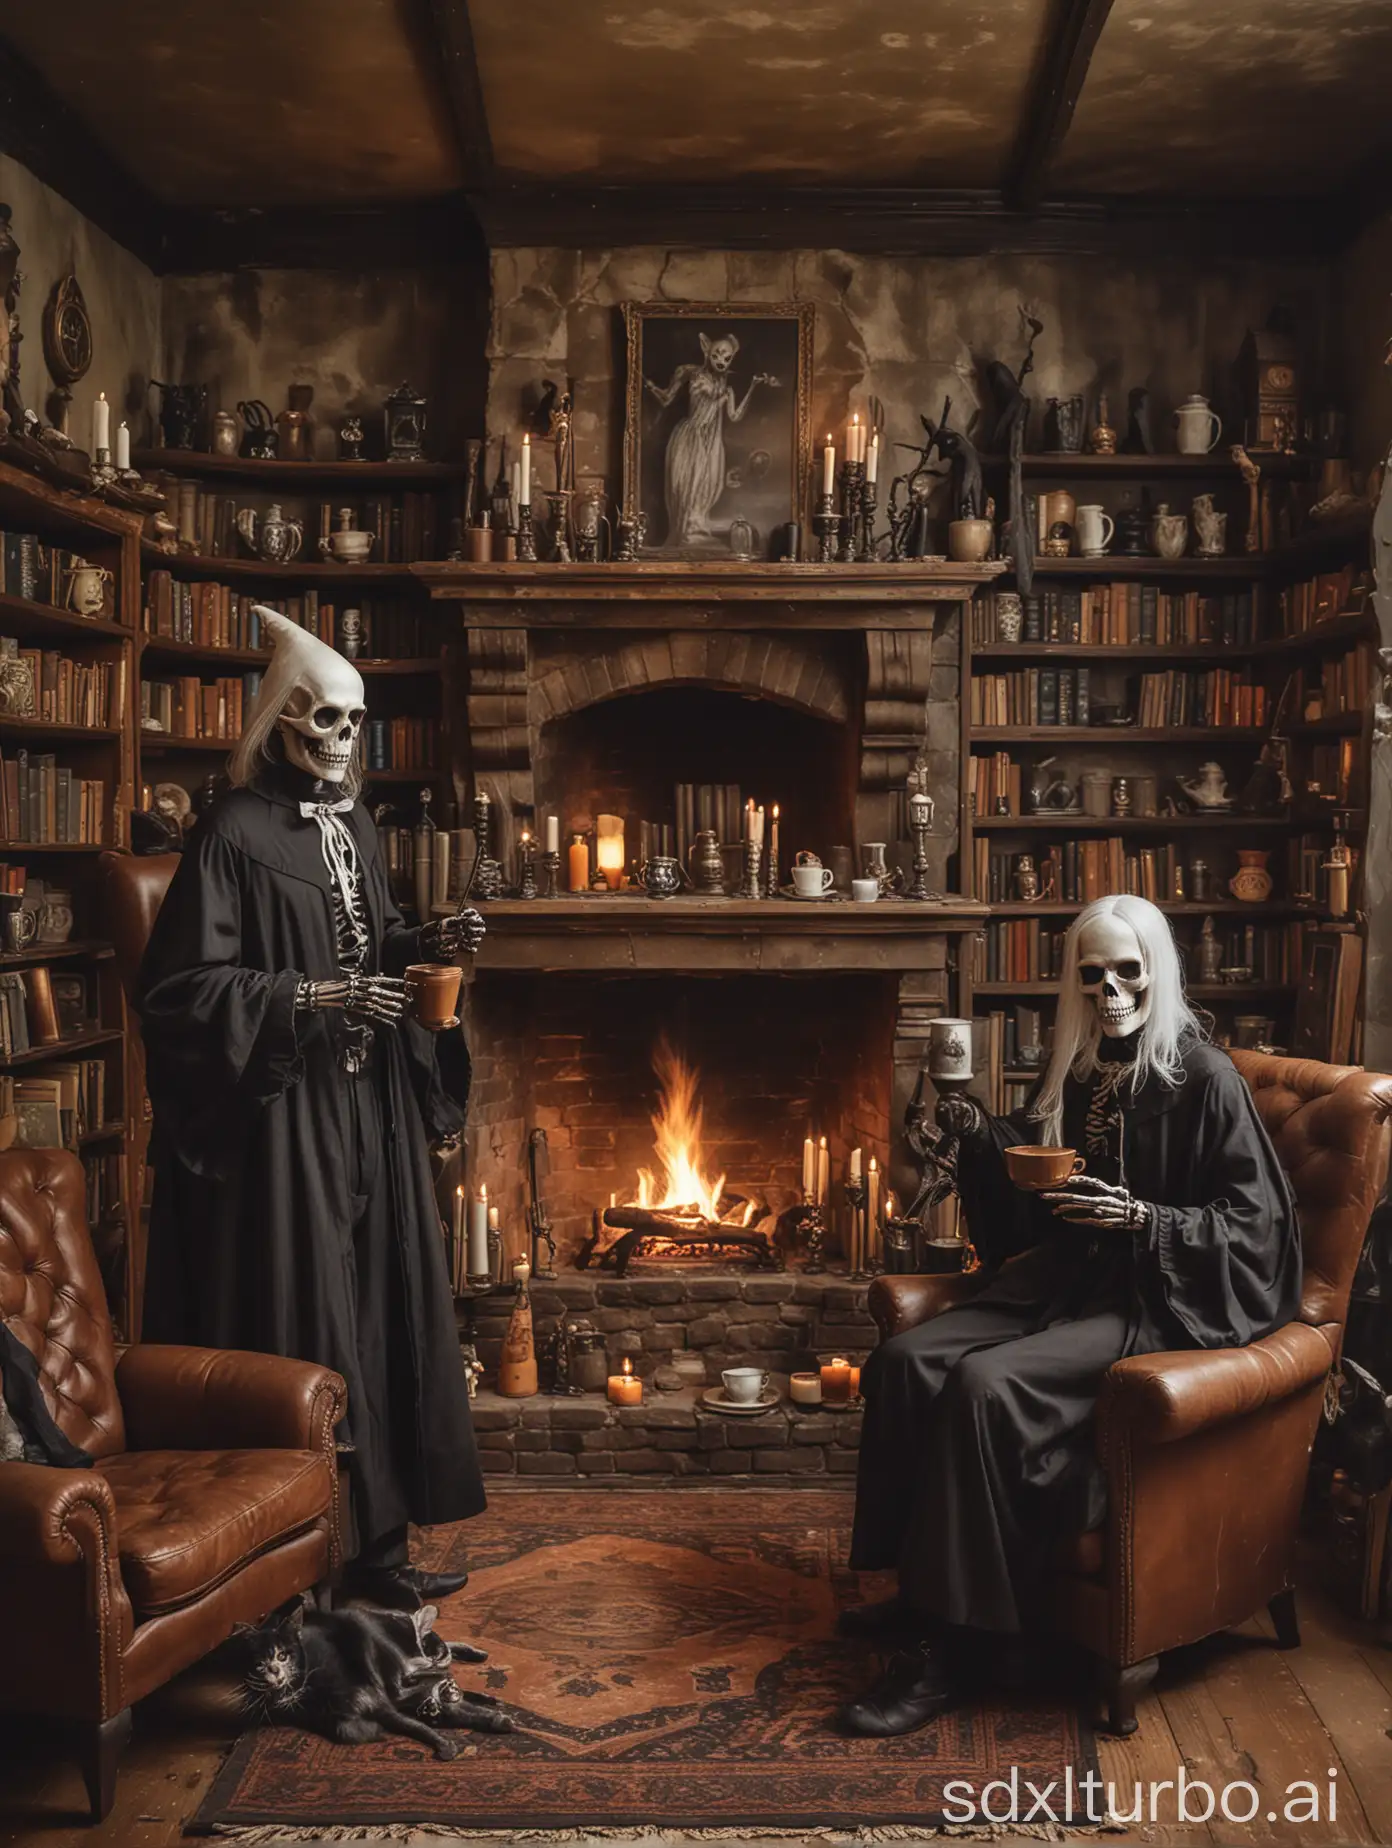 Ghostly-Gathering-Ghouls-and-Goblins-Enjoy-Vintage-Coffee-by-a-Blazing-Fireplace-in-a-Haunted-Castle